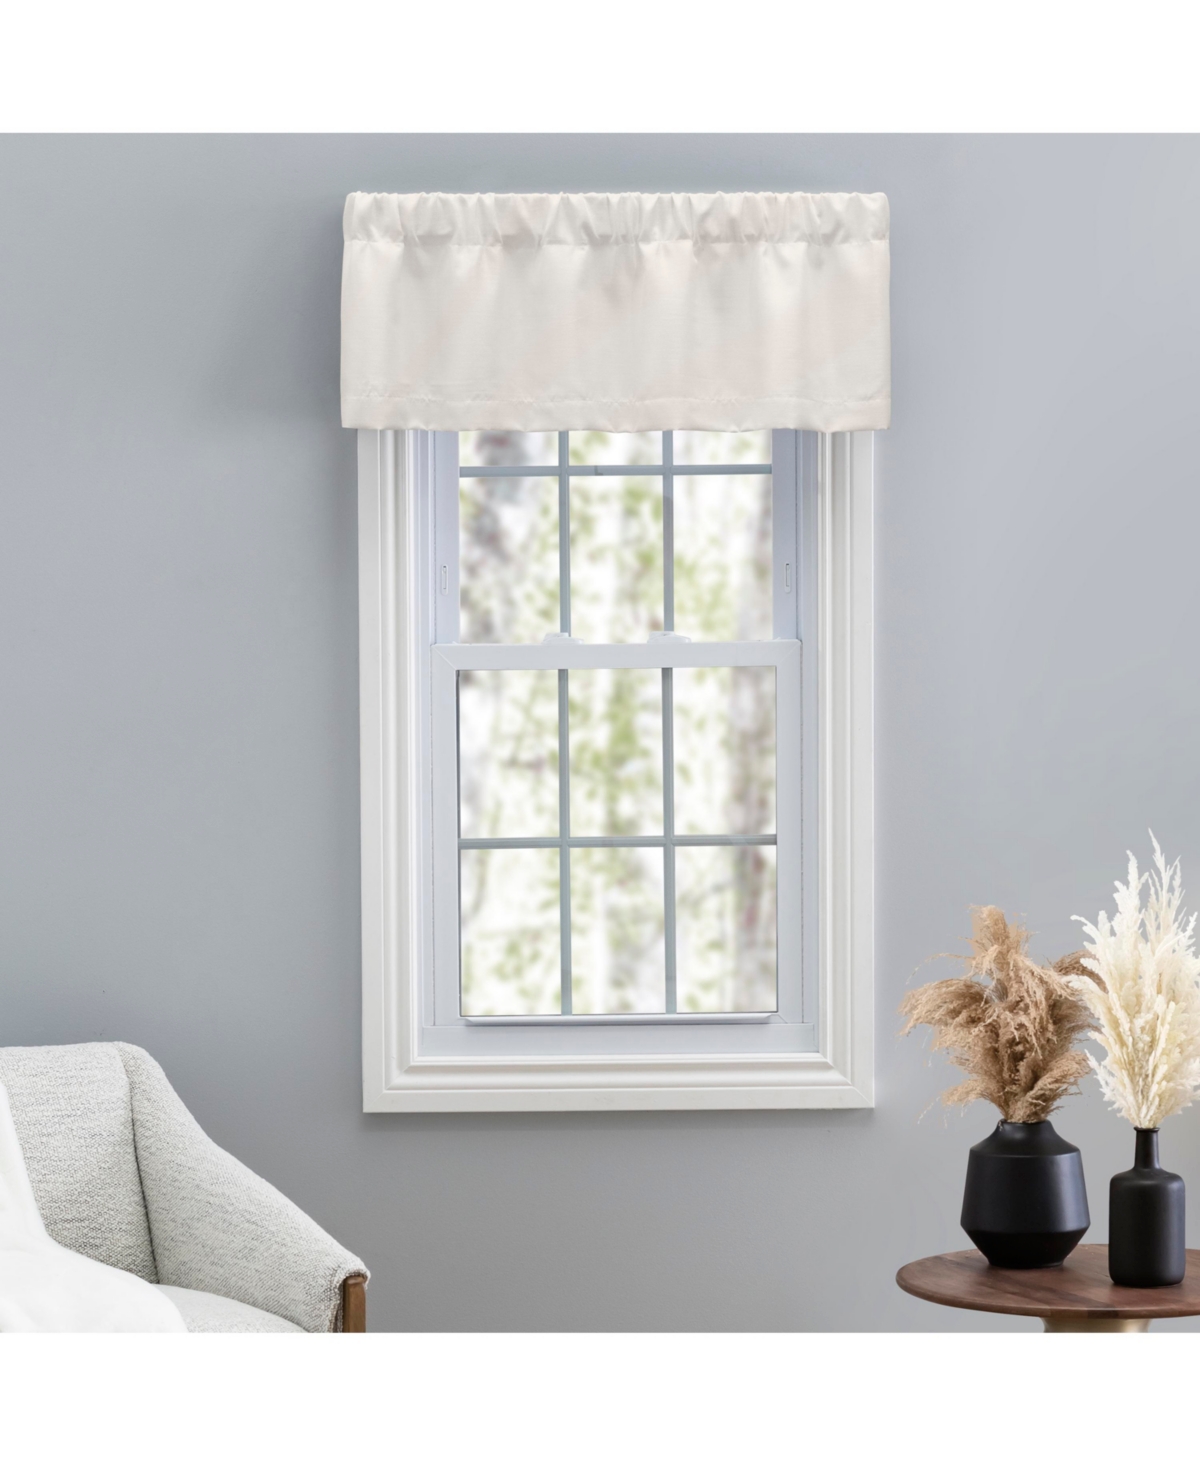 Grasscloth Lined Curtain Valance 54"W x 15"L - Sage